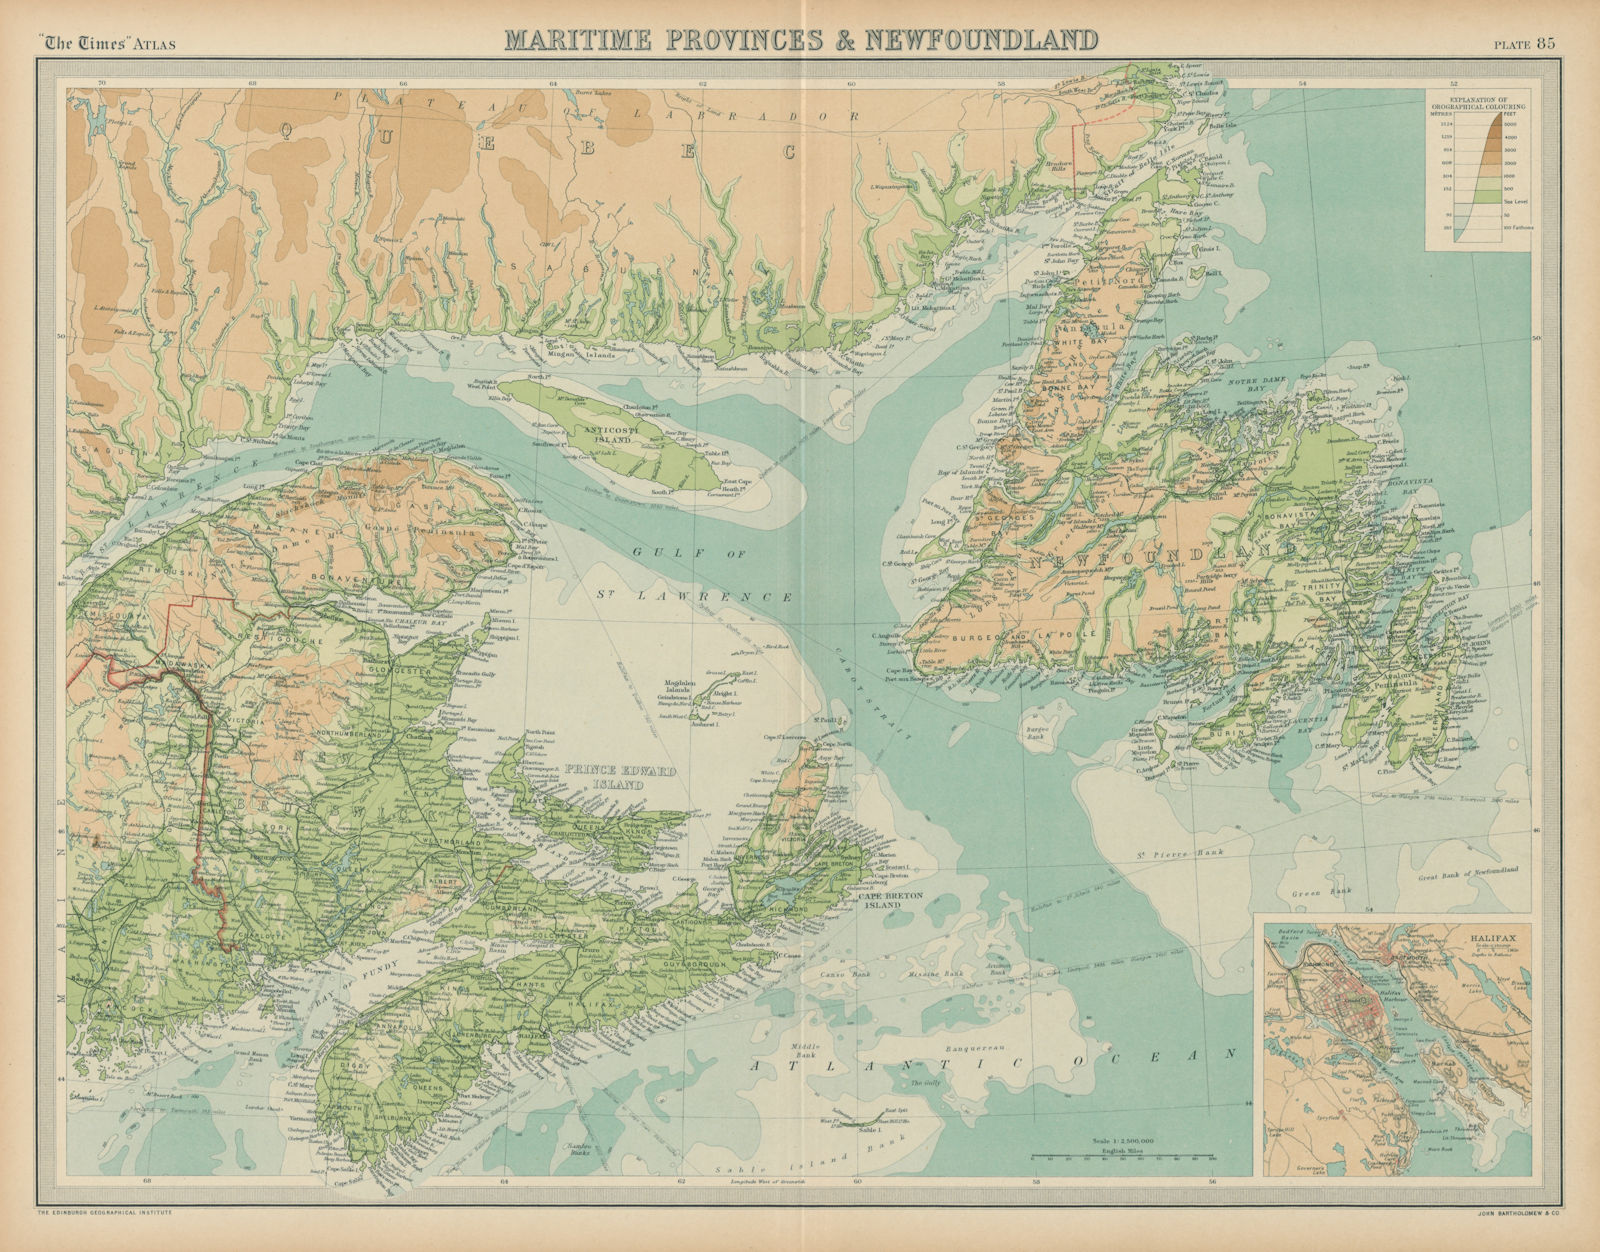 Associate Product Canada Maritime Provinces & Newfoundland. Gulf of St Lawrence. TIMES 1922 map